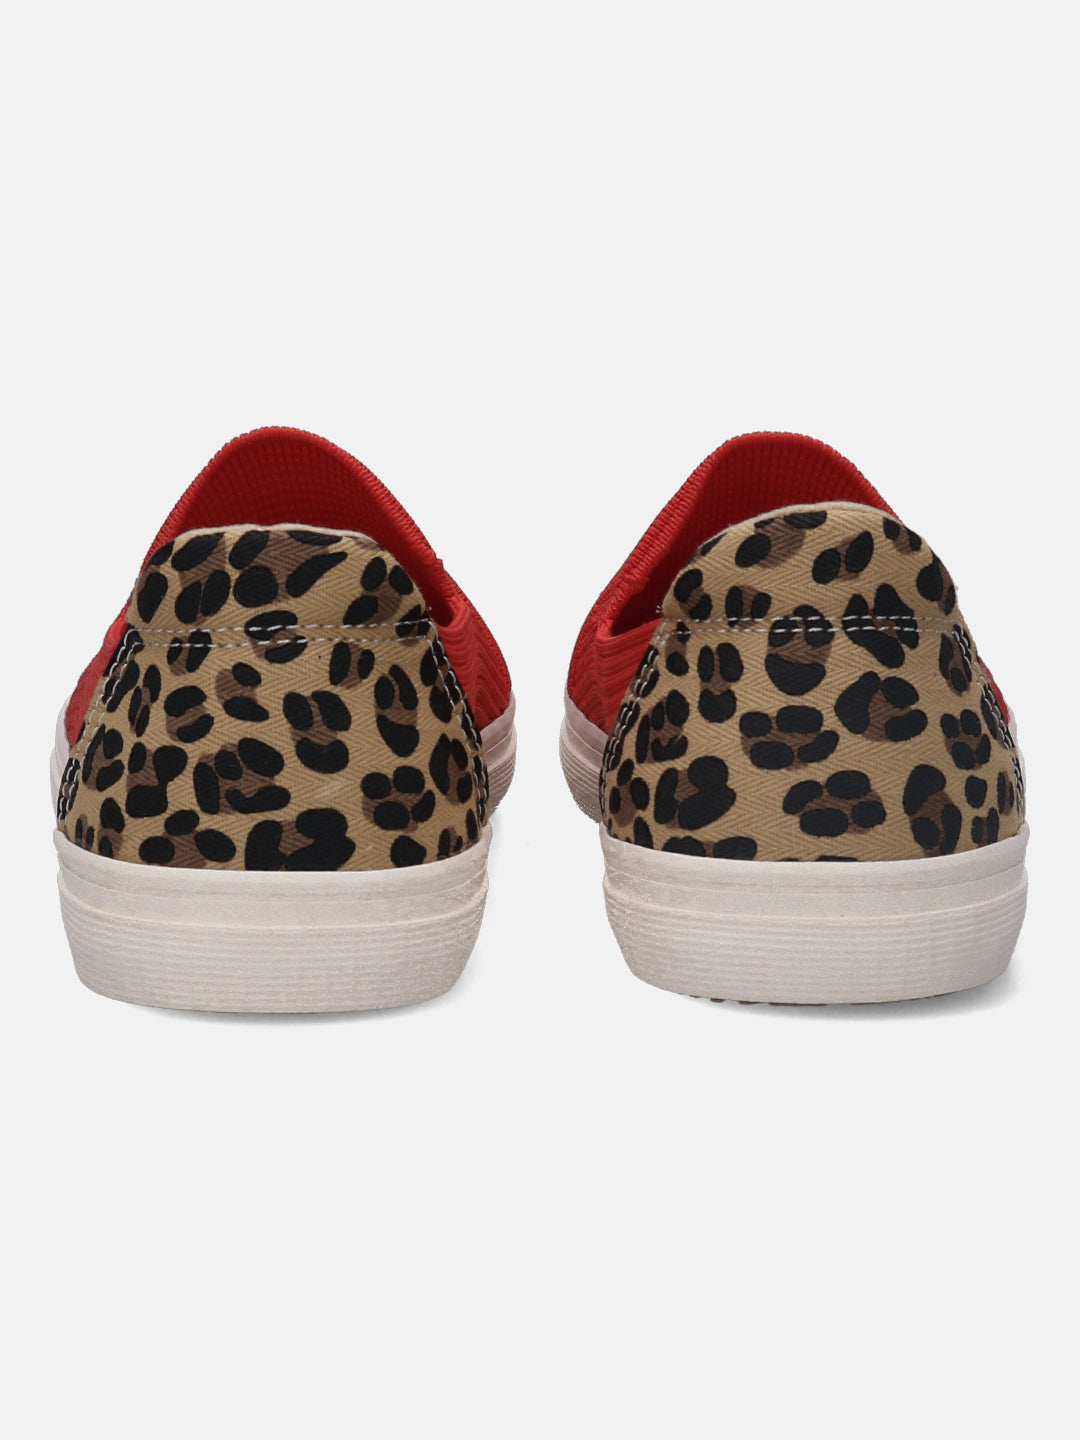 Level Red Animal Print Casual Loafers - BAGATT